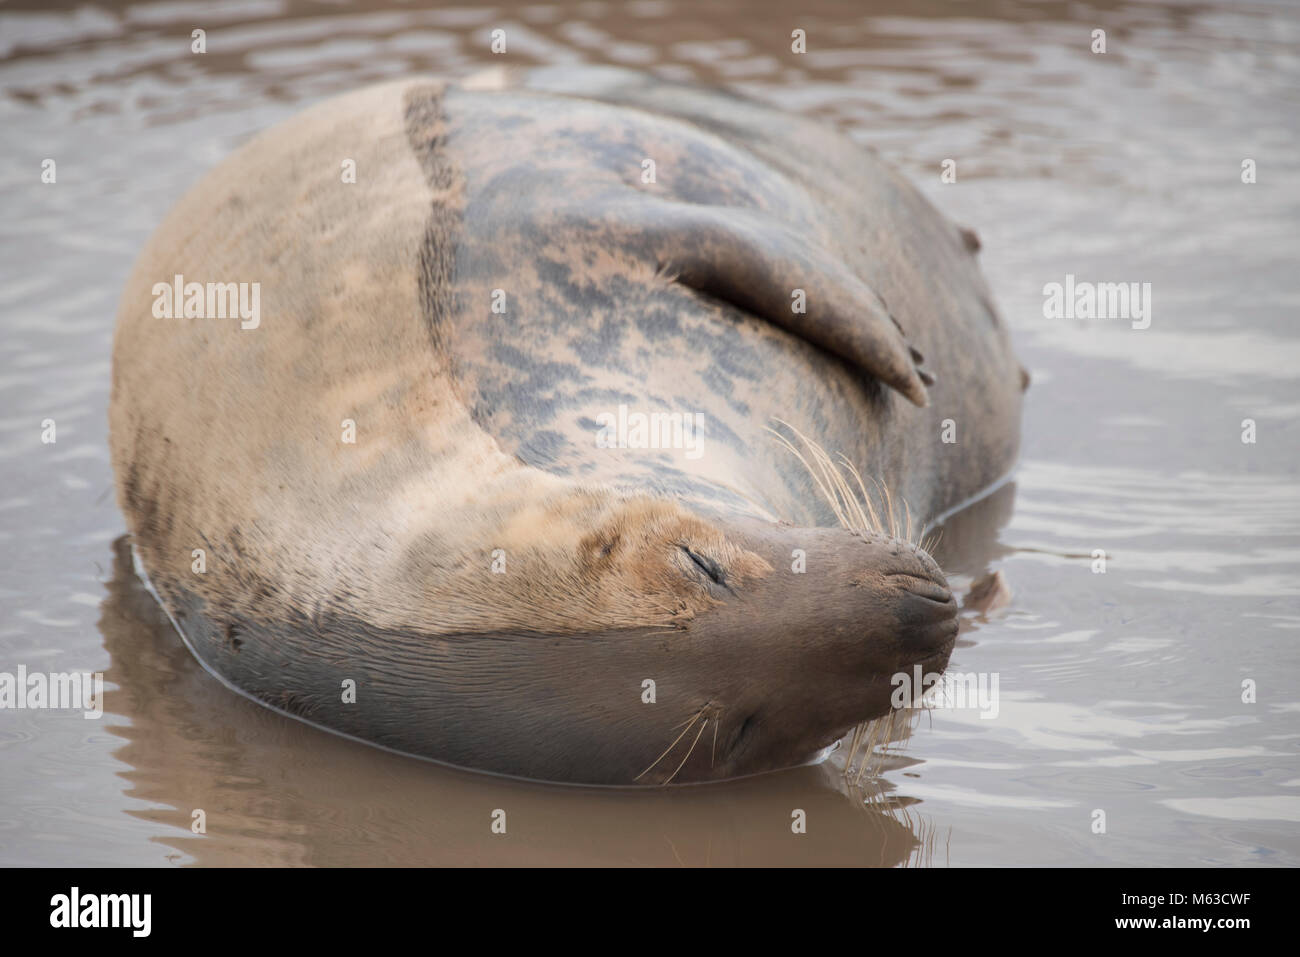 Donna Nook, Lincolnshire, UK – Nov 15: A heavily preganant grey seal lays in shallows water. Seal mother-to-be in labour on 15 Nov 2016 at Donna Nook  Stock Photo